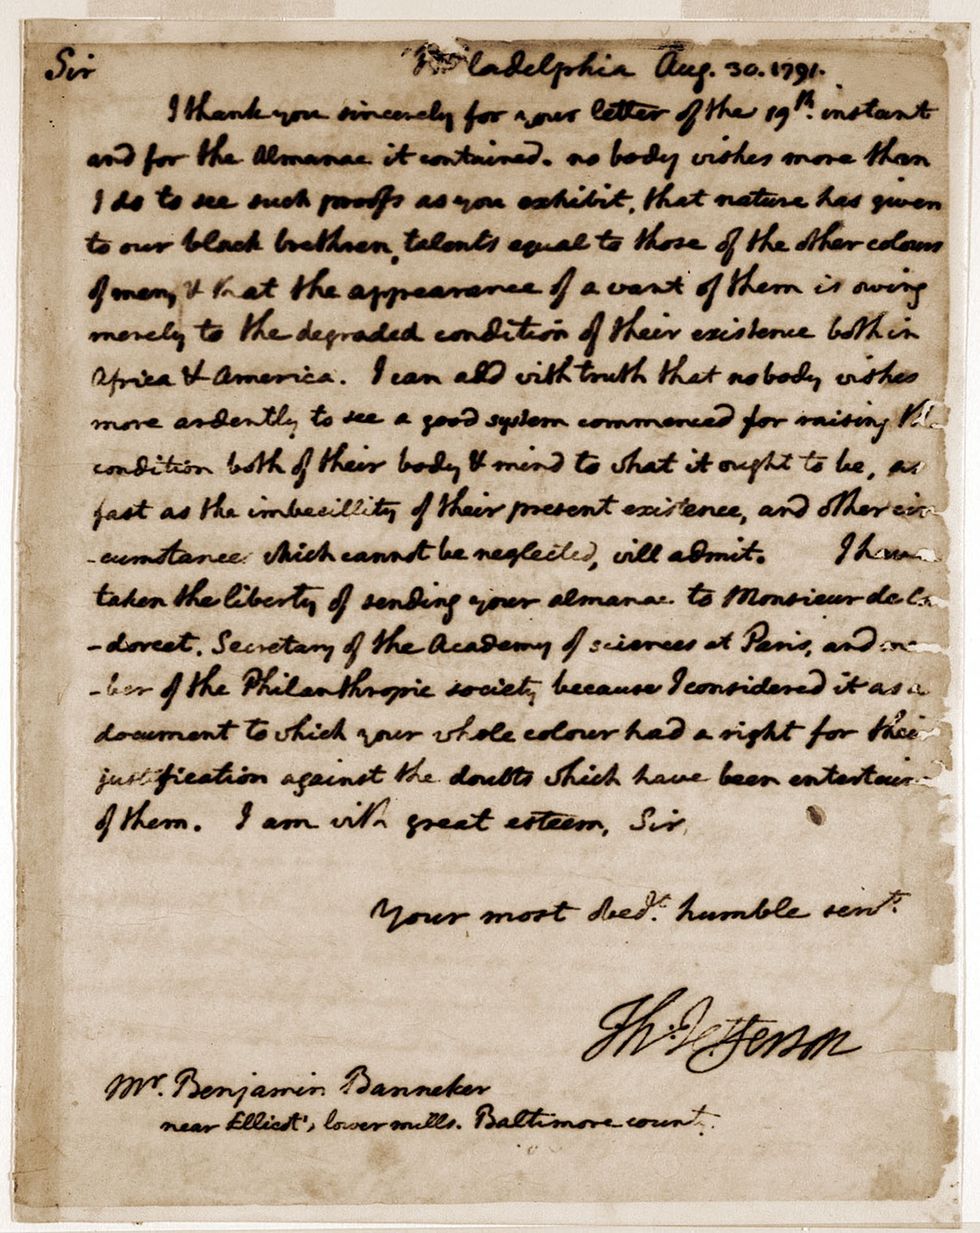 Thomas Jefferson's letter to Benjamin Banneker dated August 30, 1791